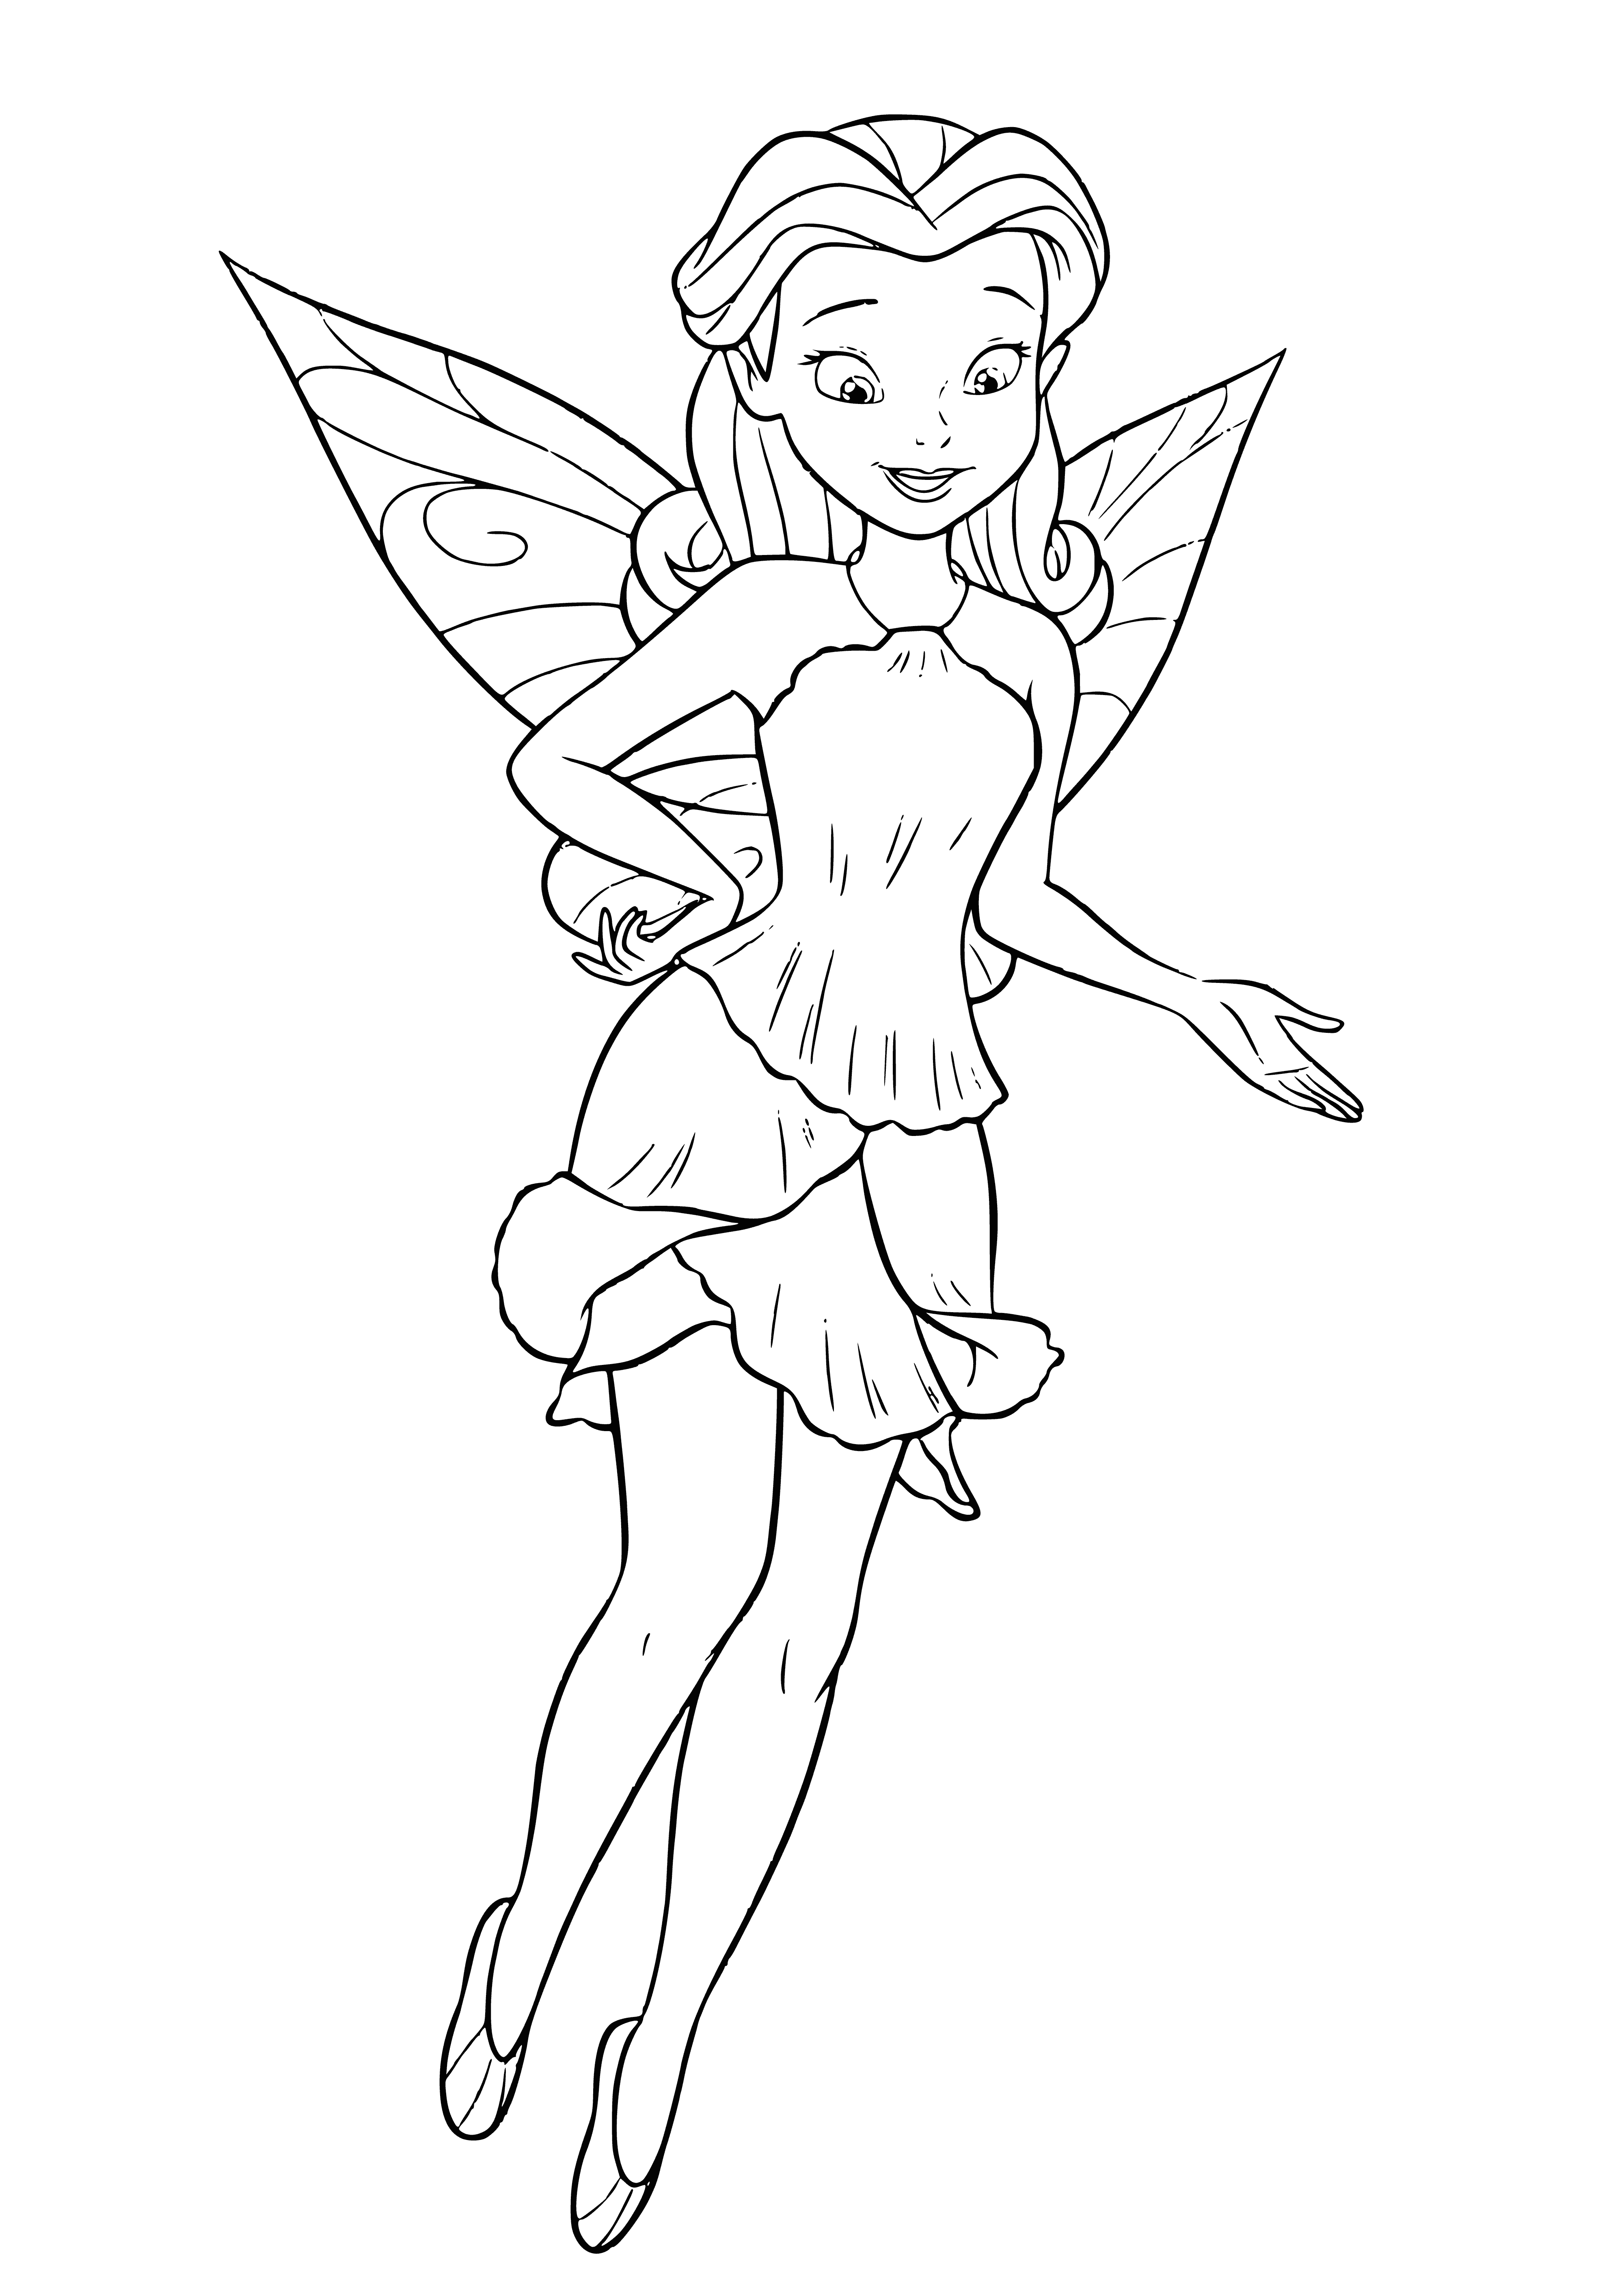 coloring page: Monster, with horns and wings, flying above scared group of small creatures. Long tail and fur covering it.